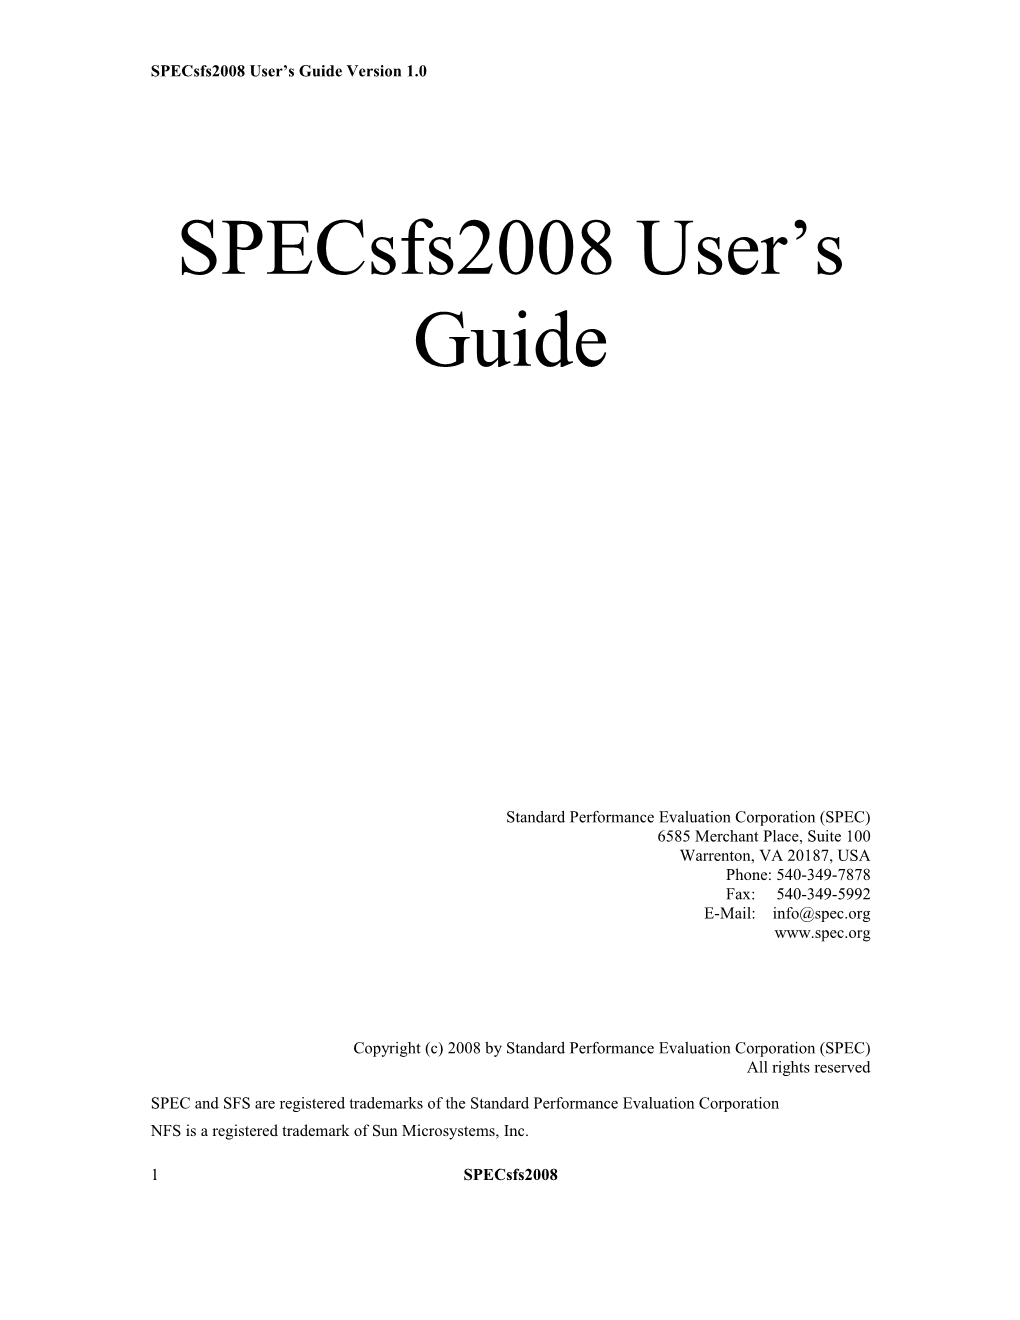 Specsfs2008 User S Guide Version 1.0